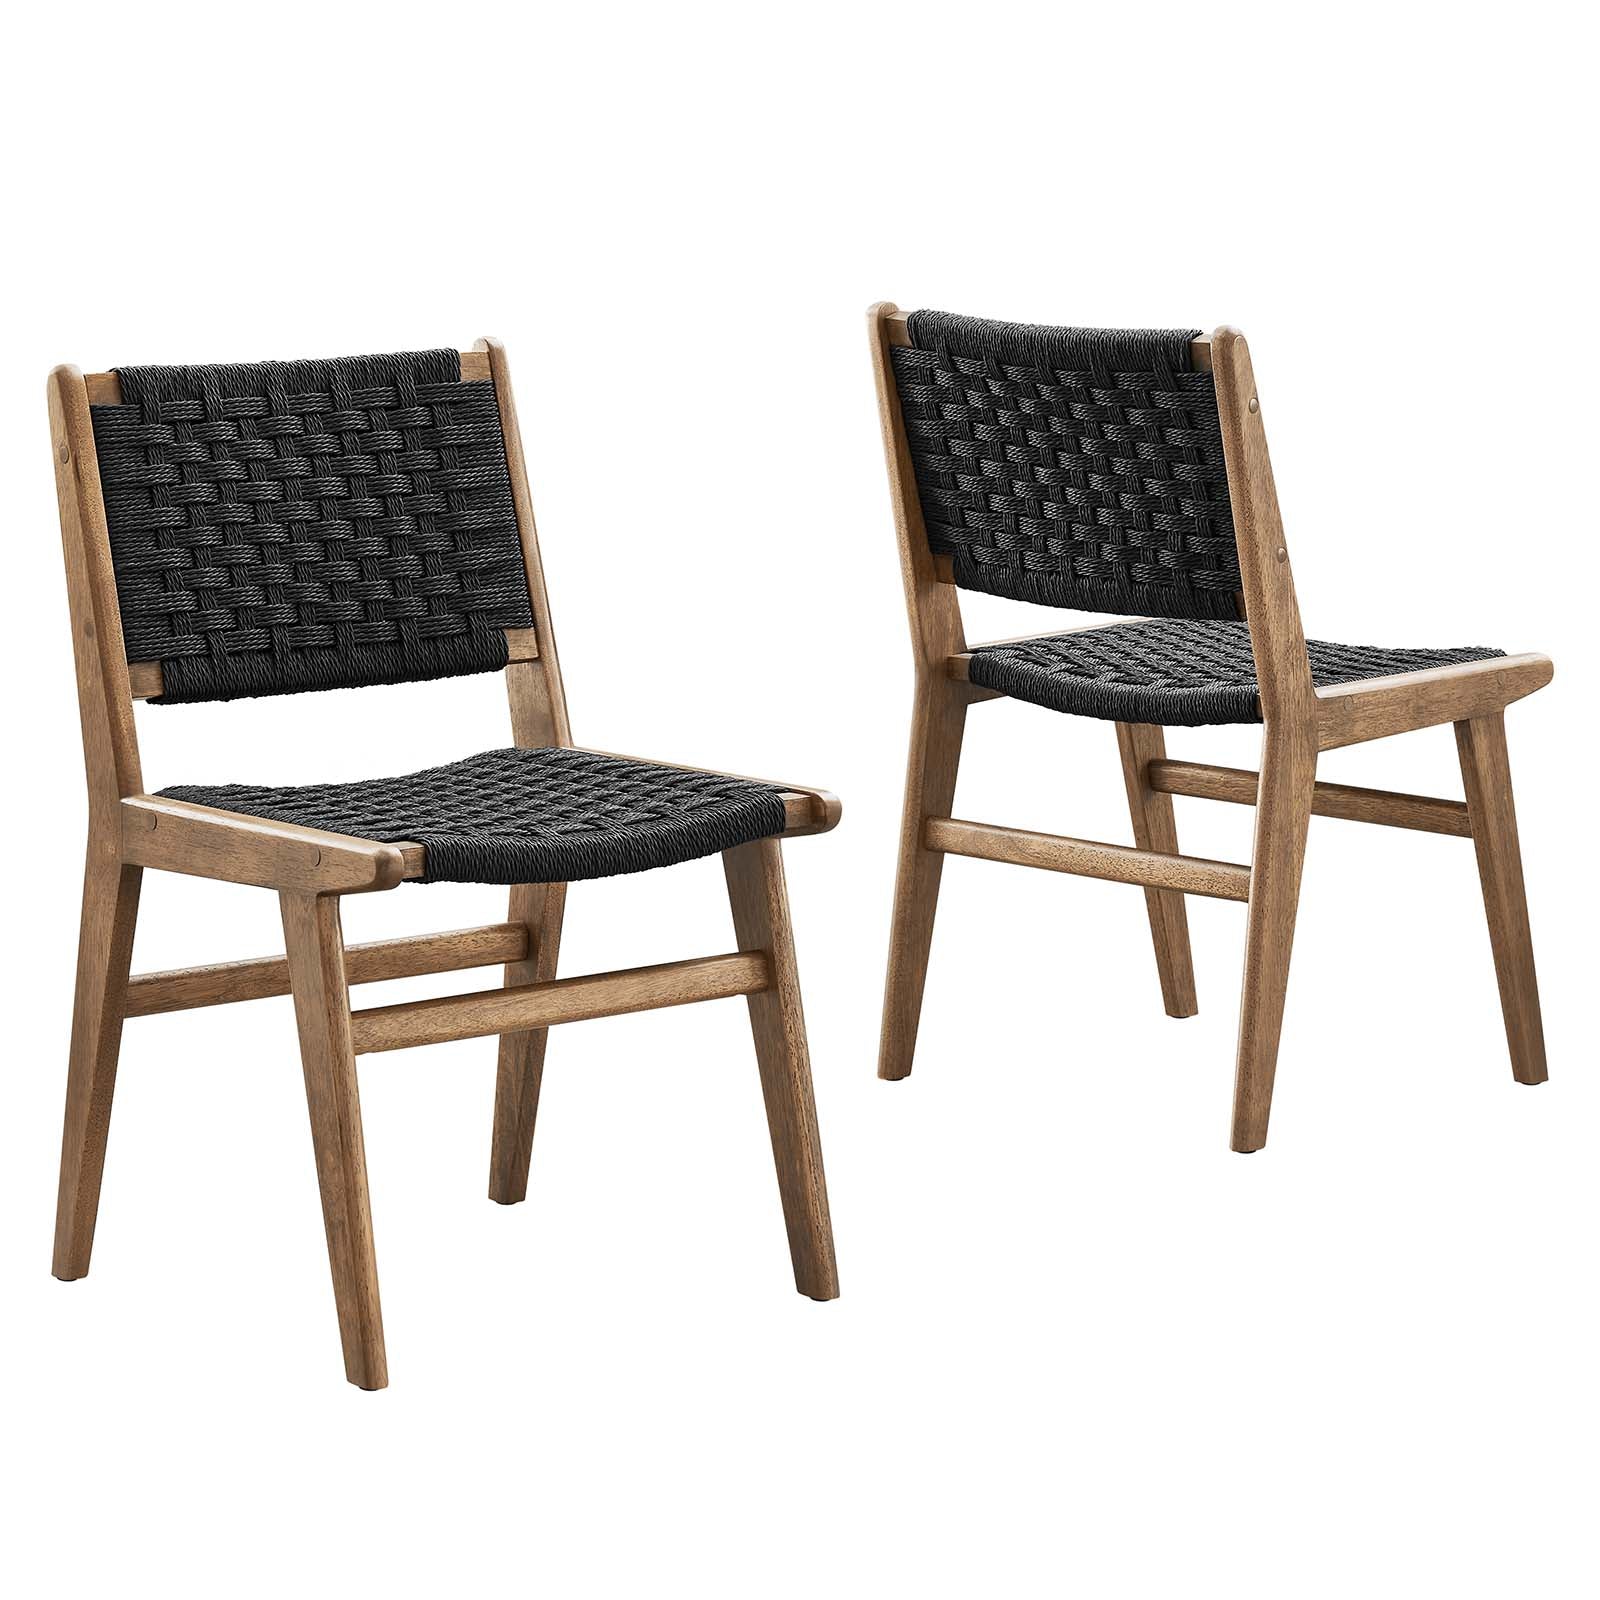 Saorise Woven Rope Wood Dining Side Chair - Set of 2